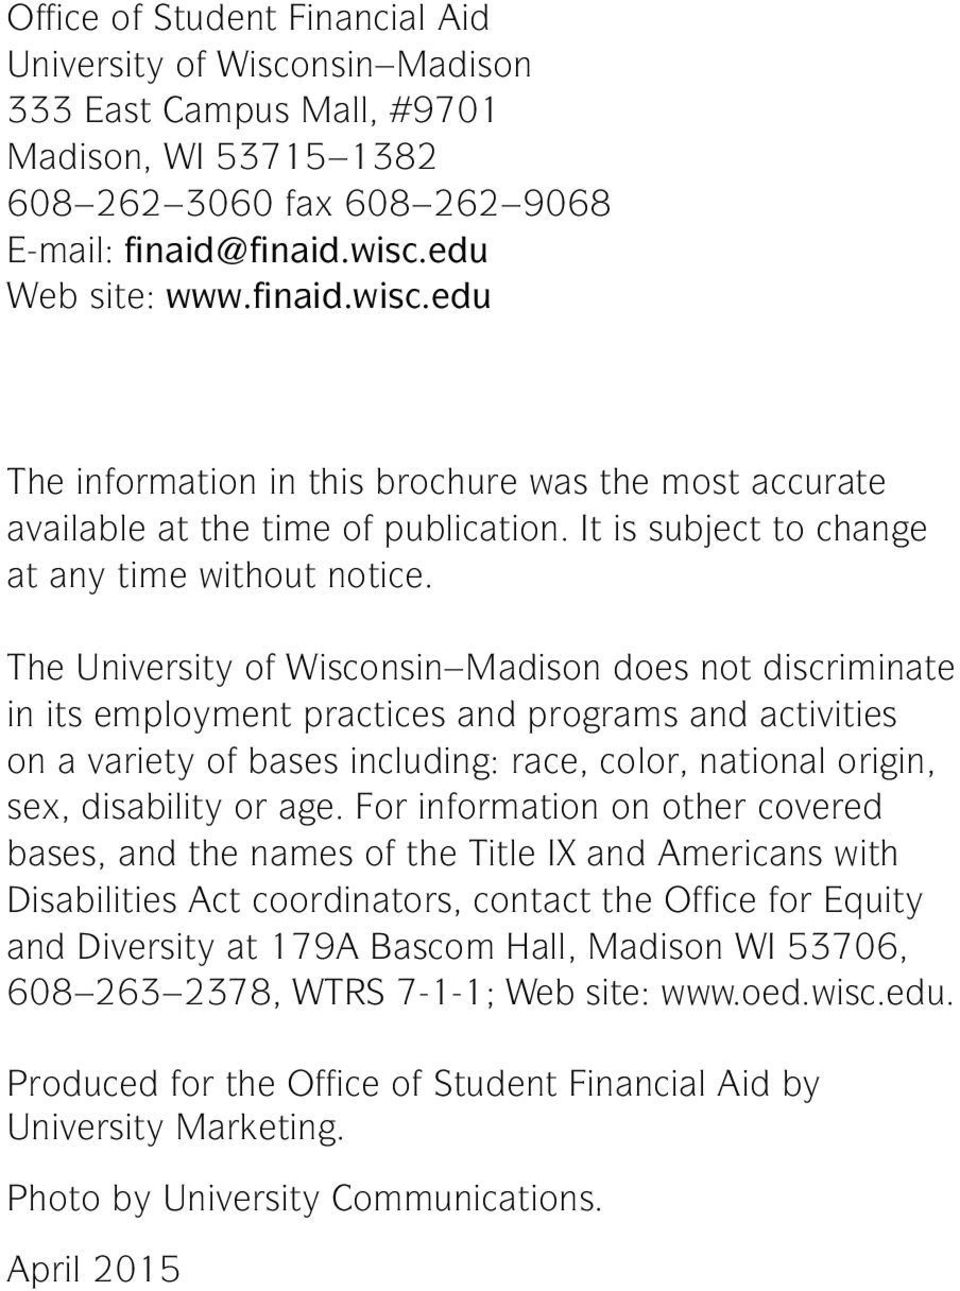 The University of Wisconsin Madison does not discriminate in its employment practices and programs and activities on a variety of bases including: race, color, national origin, sex, disability or age.